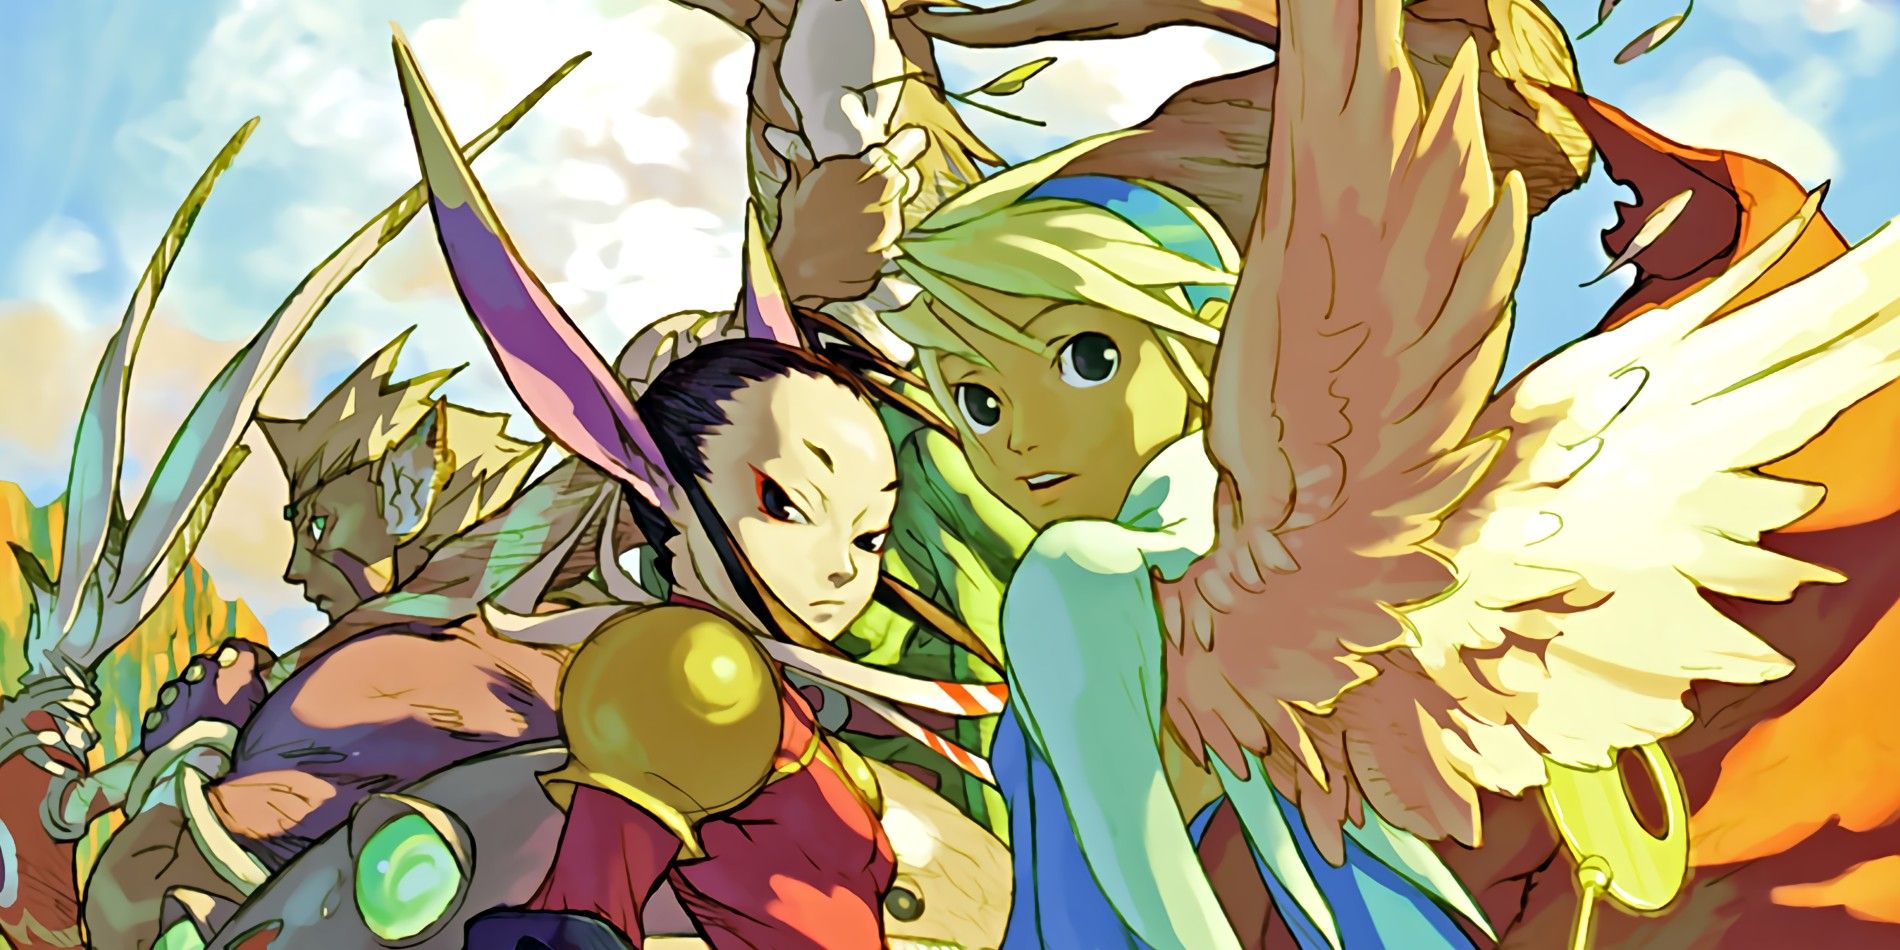 Every Classic JRPG Series That Needs A Revival - Breath of Fire